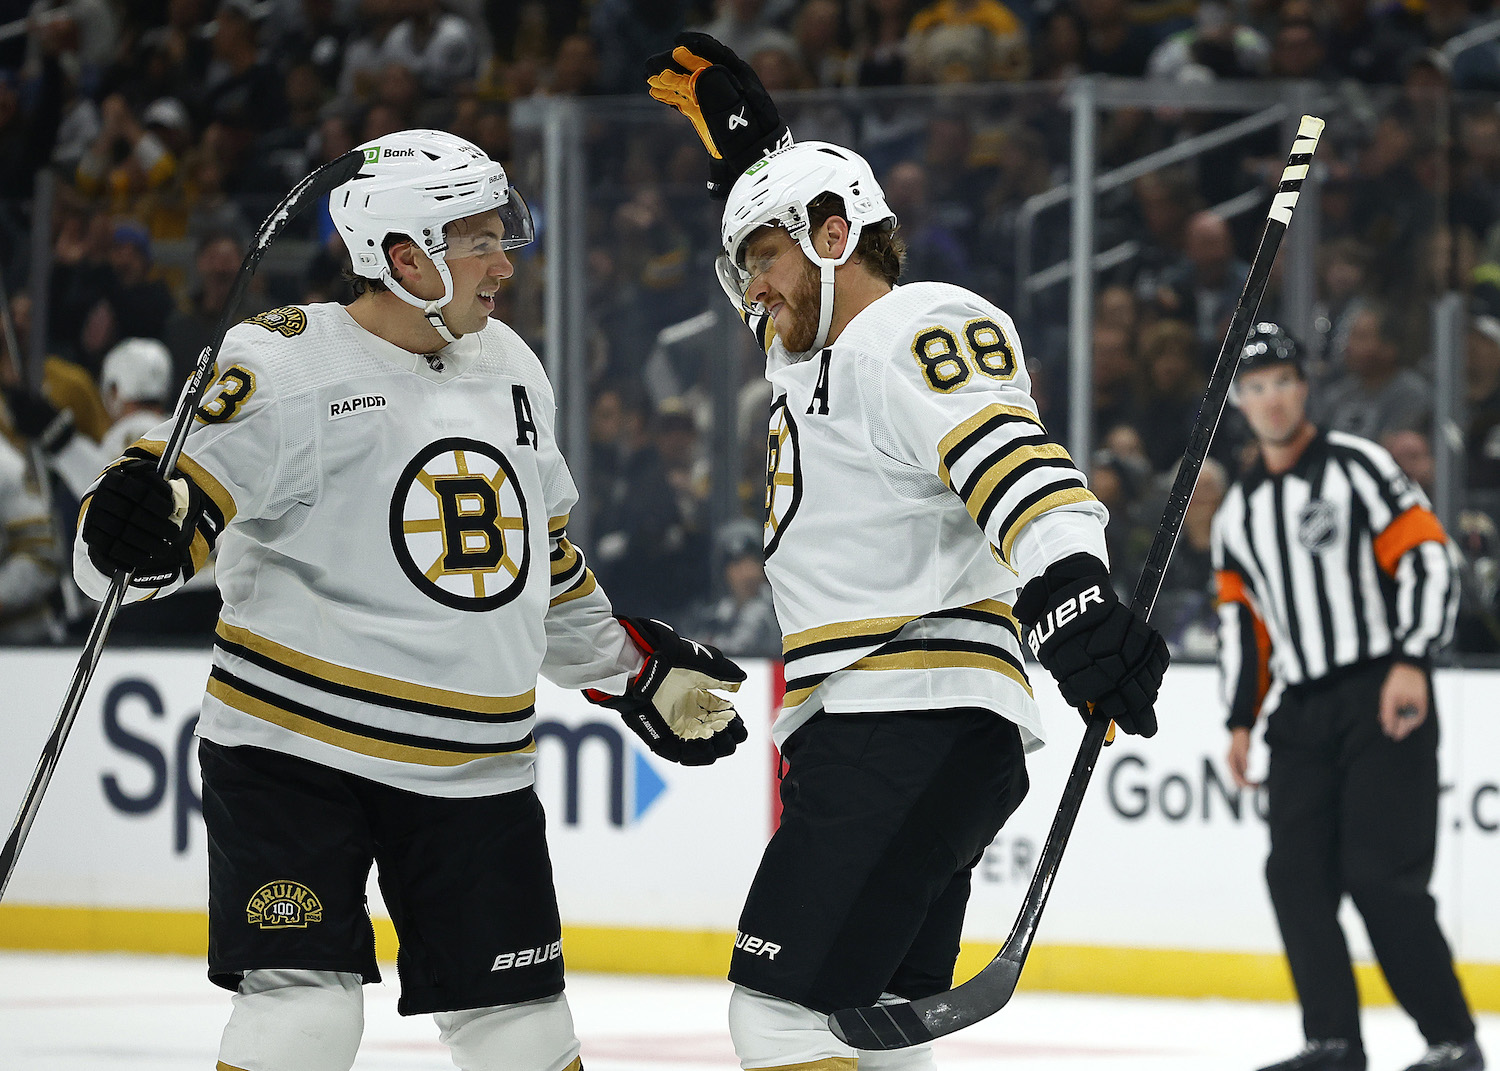 LOS ANGELES, CALIFORNIA - OCTOBER 21: David Pastrnak #88 celebrates a goal with Charlie McAvoy #73 of the Boston Bruins against the Los Angeles Kings in the first period at Crypto.com Arena on October 21, 2023 in Los Angeles, California. (Photo by Ronald Martinez/Getty Images)